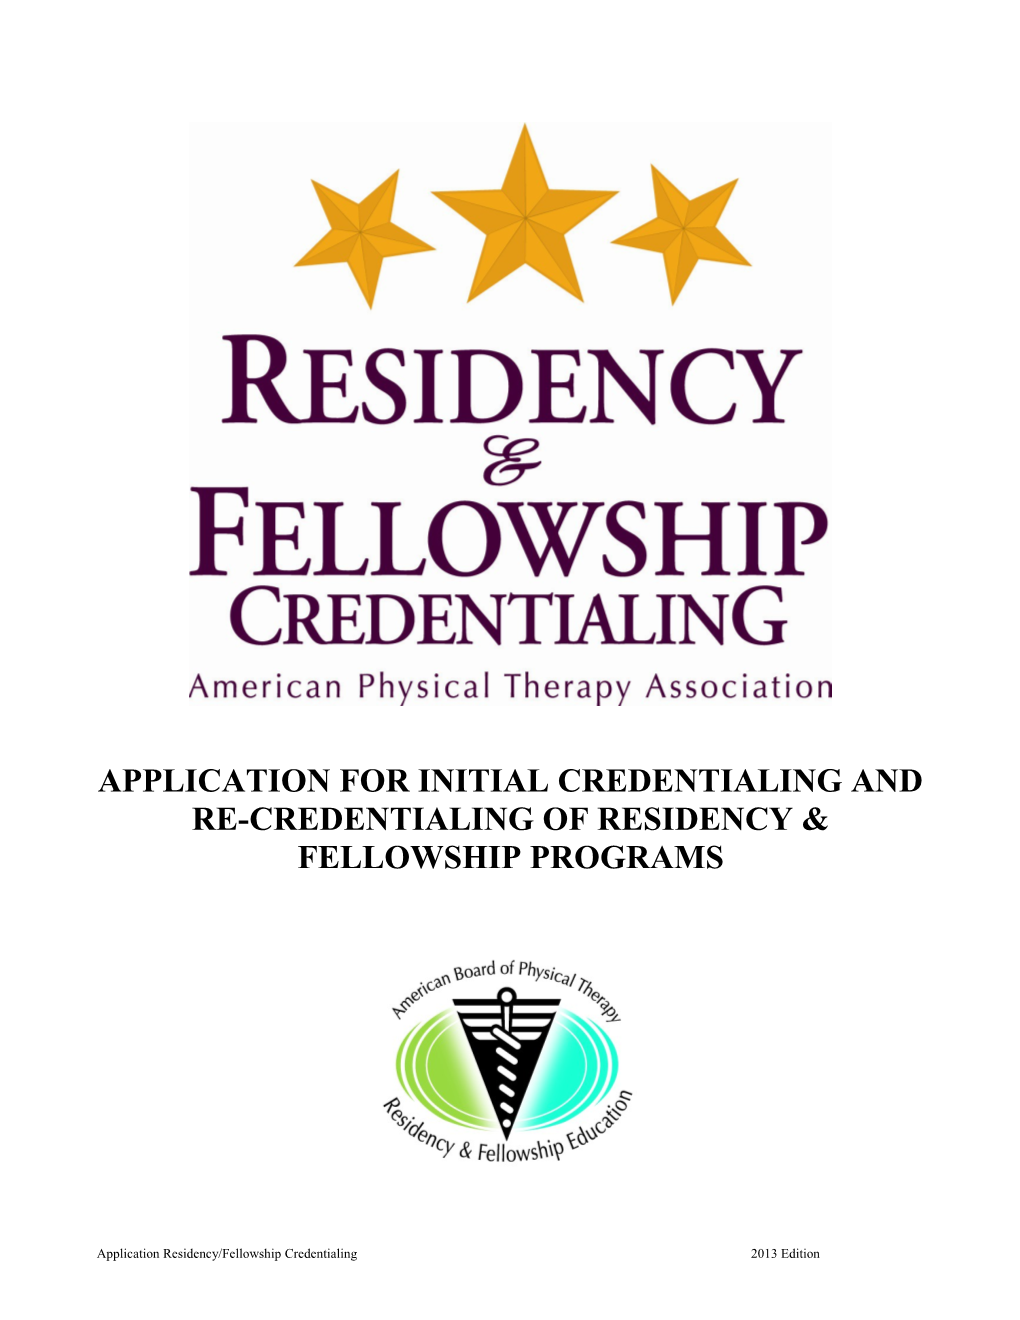 Application for Initial Credentialingand